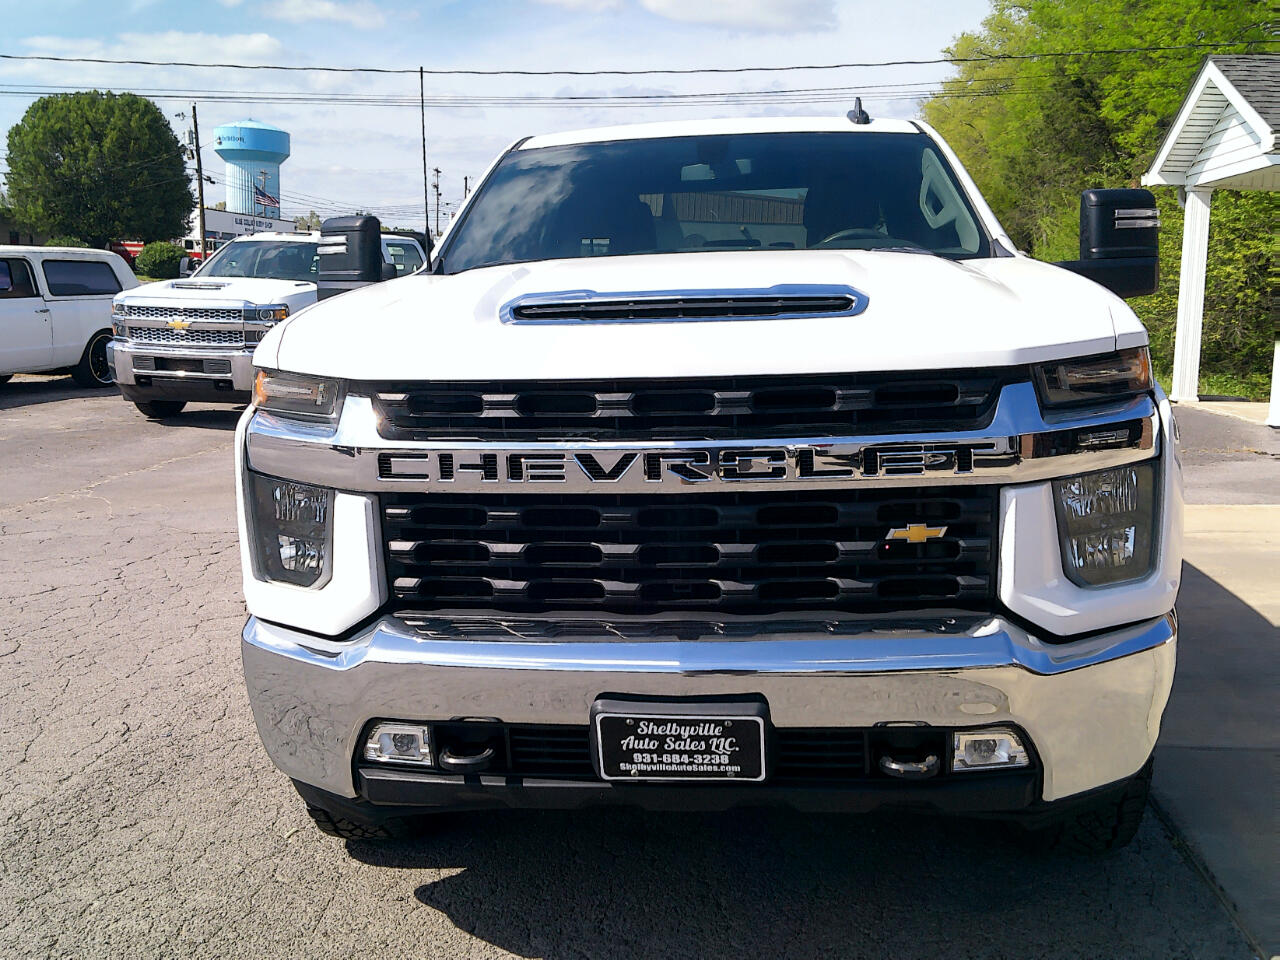 2020 Chevrolet Silverado 2500HD CHECK IT OUT4WDSTEP BARSCLEAN CARFAXGOOD TIRESBACK UP